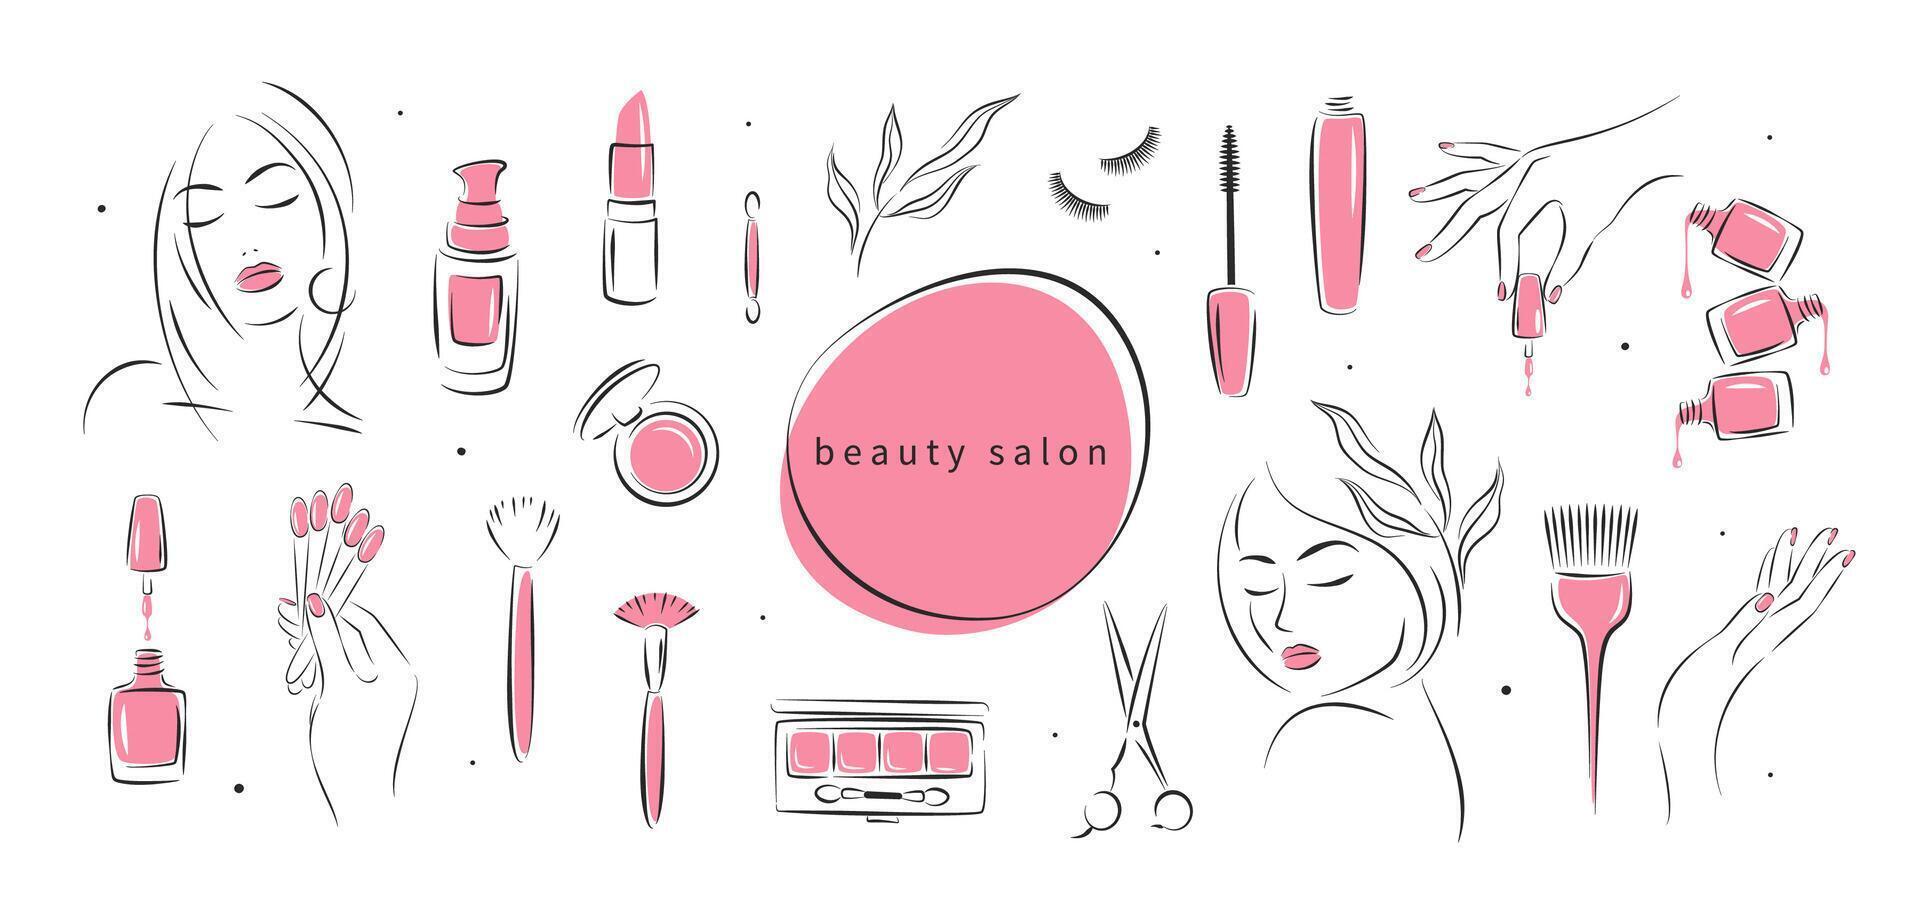 Big set of elements and icons for beauty salon. Nail polish,  manicured female hands, beautiful woman face, lipstick, eyelash extension, makeup, hairdressing. Vector illustrations